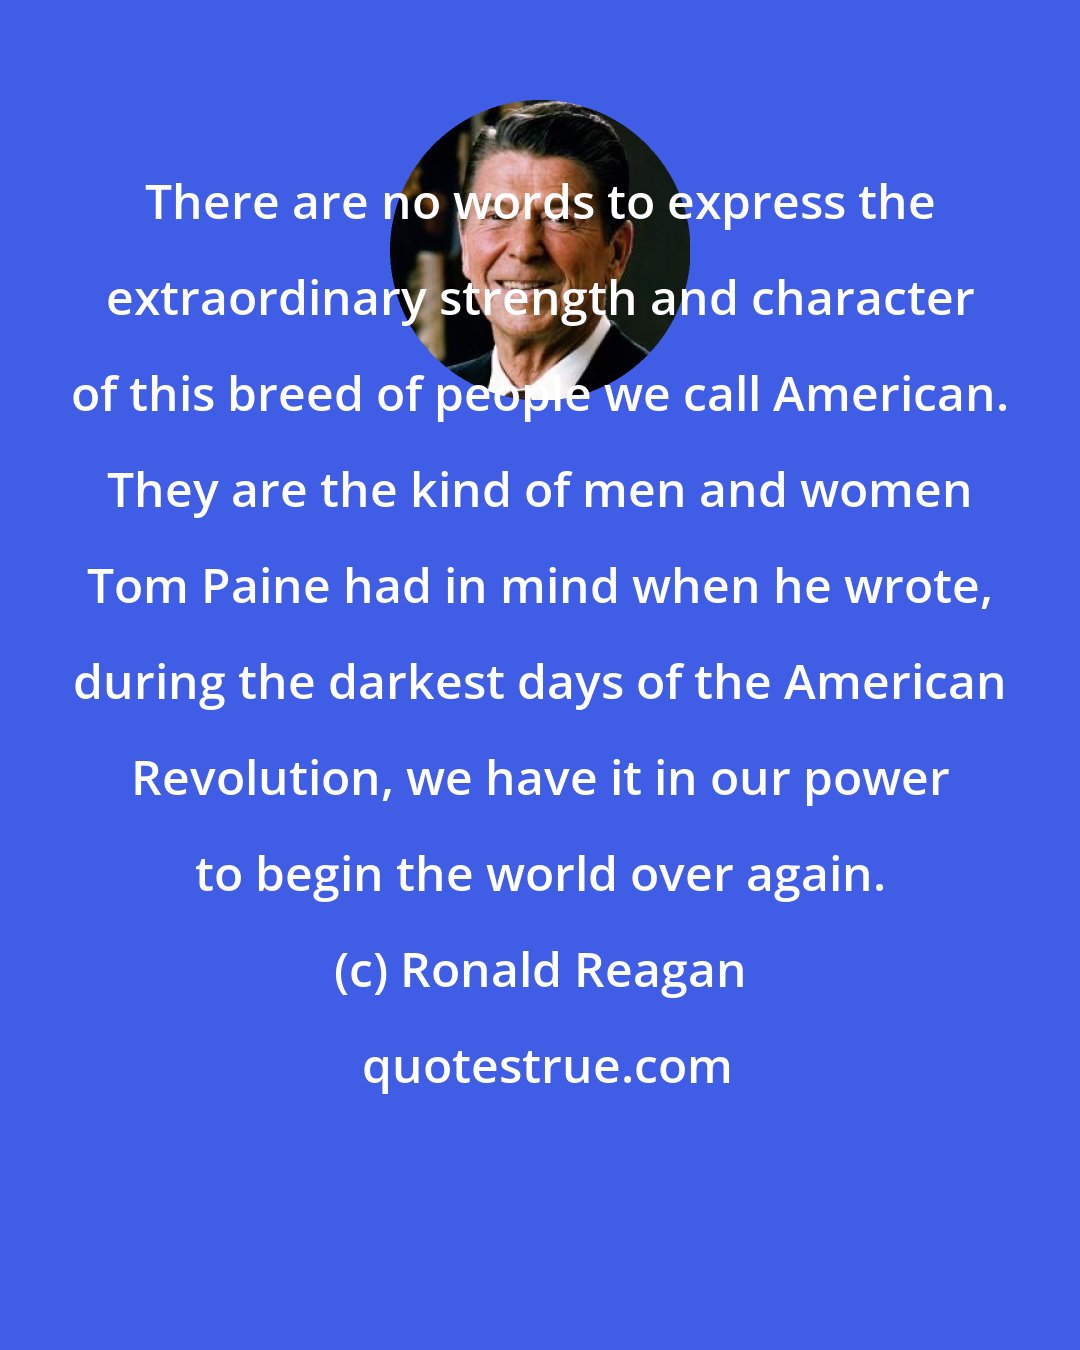 Ronald Reagan: There are no words to express the extraordinary strength and character of this breed of people we call American. They are the kind of men and women Tom Paine had in mind when he wrote, during the darkest days of the American Revolution, we have it in our power to begin the world over again.